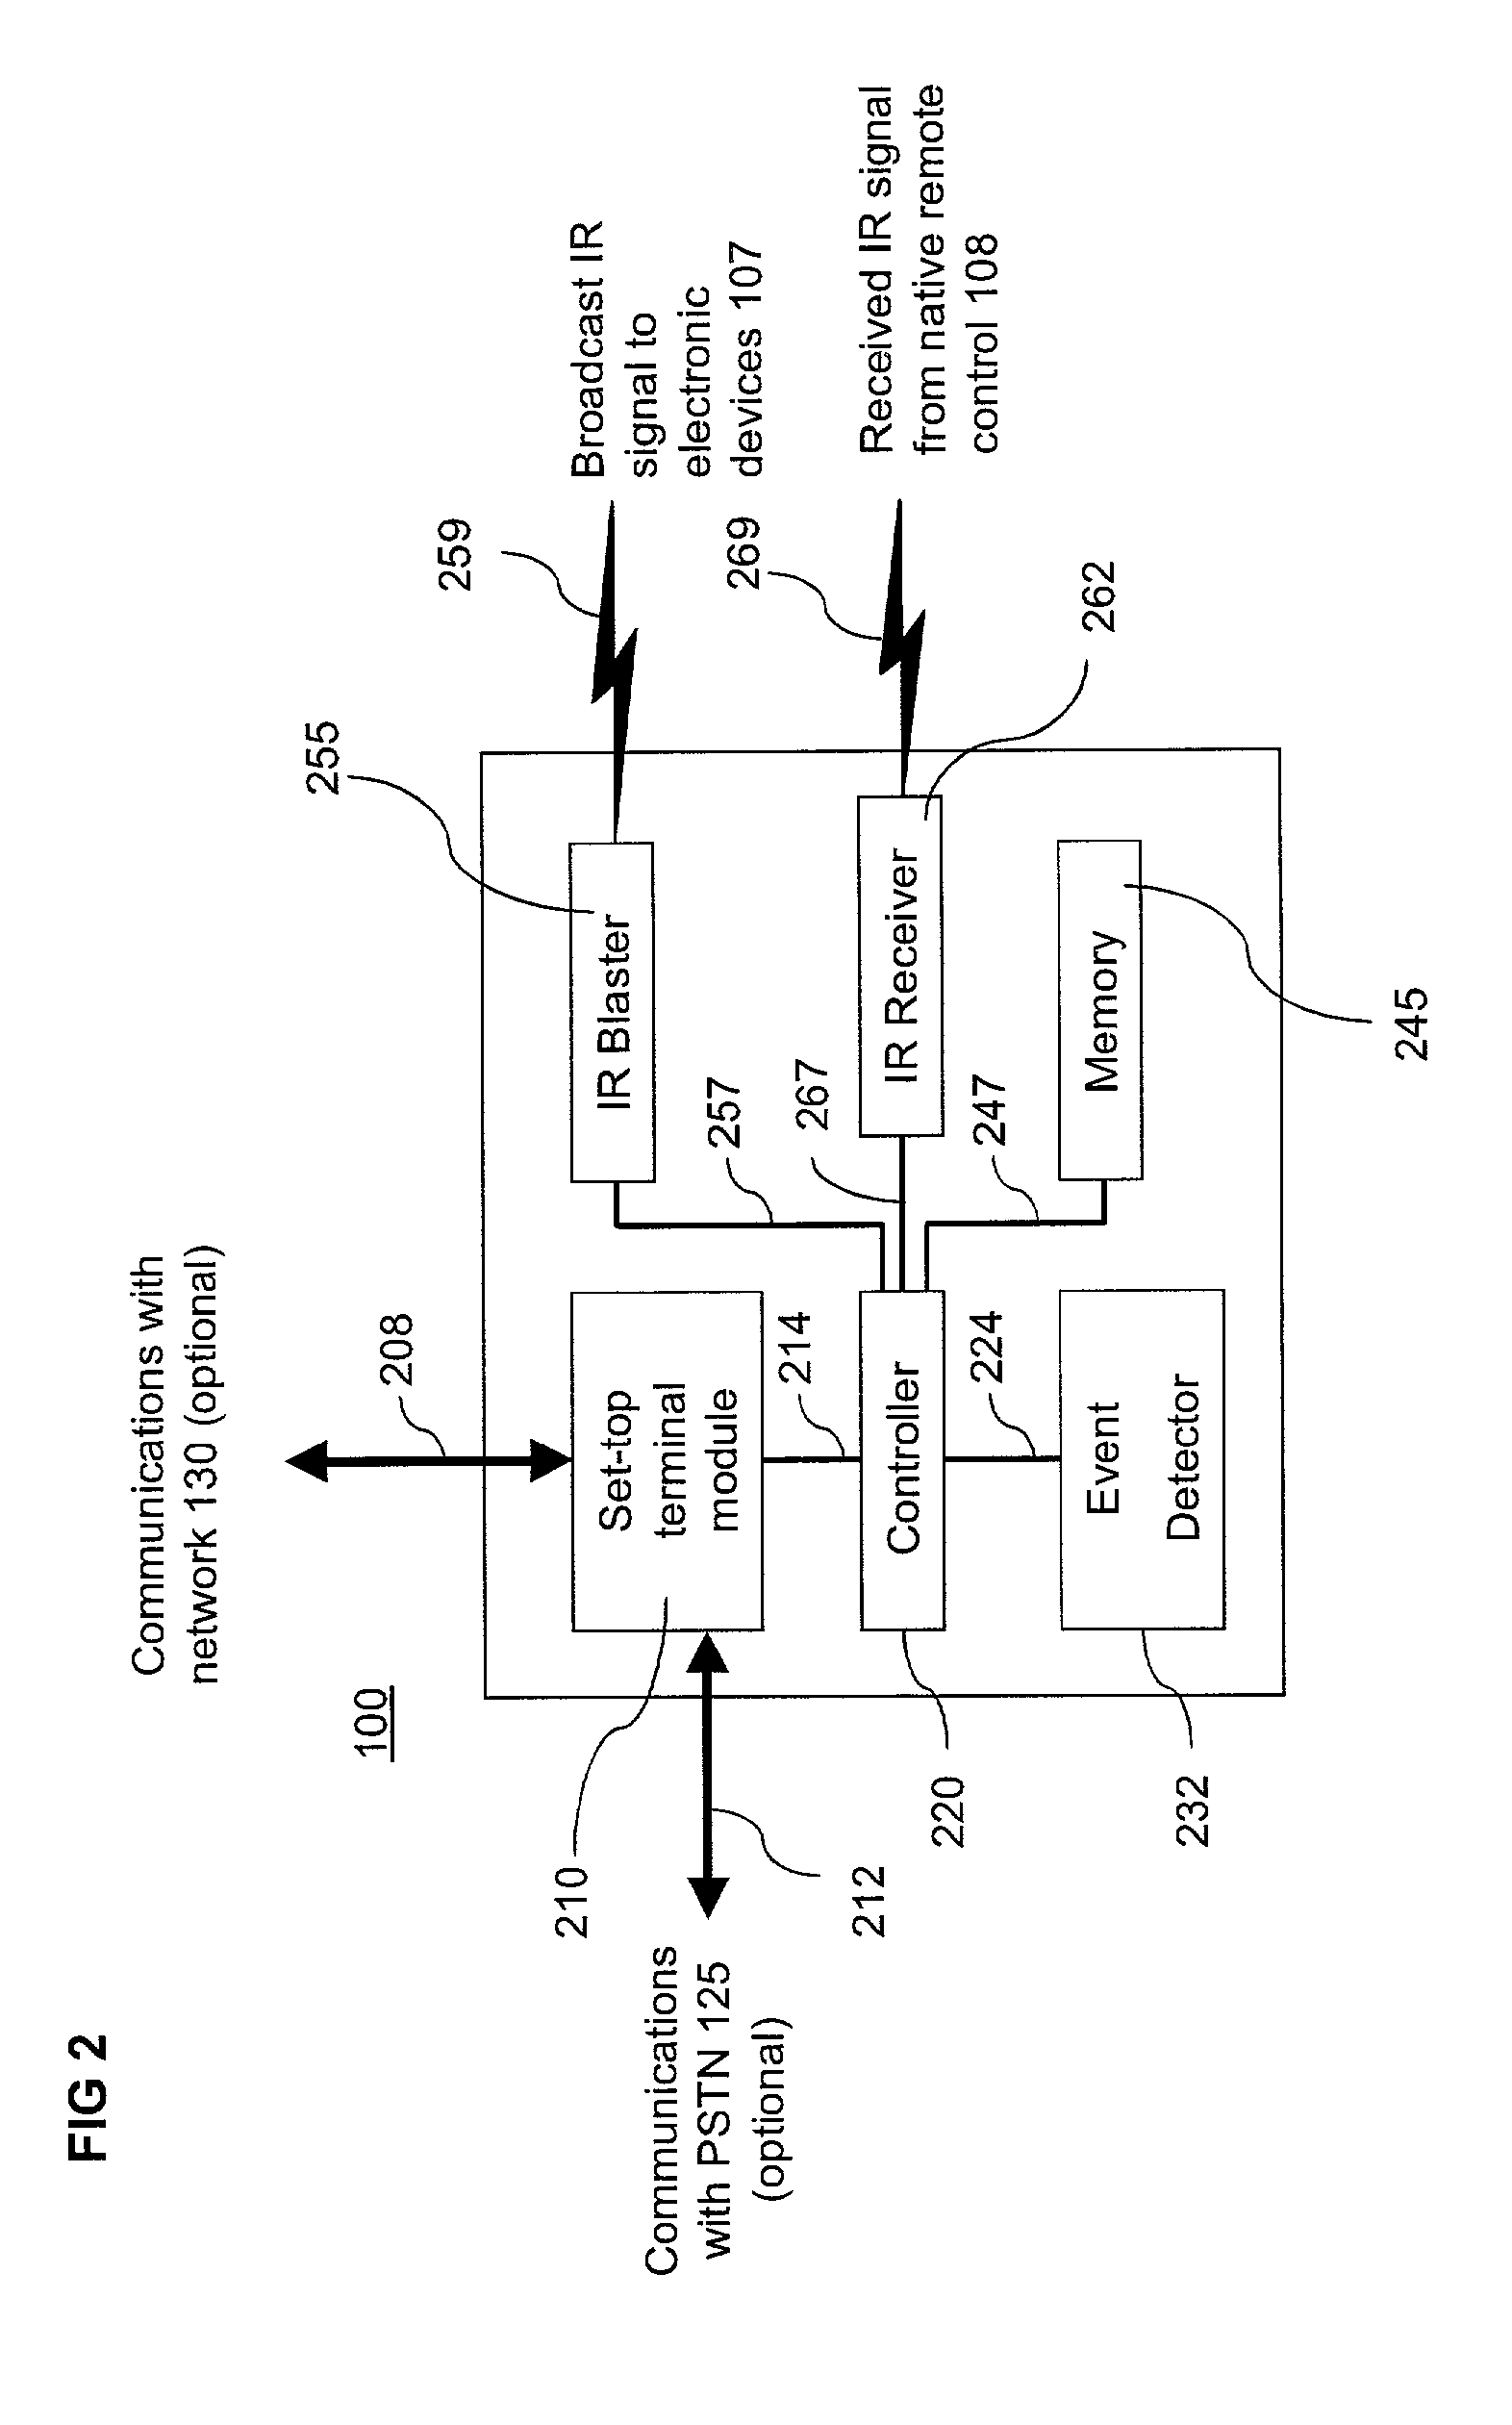 Method and apparatus for automatic set-up of electronic devices